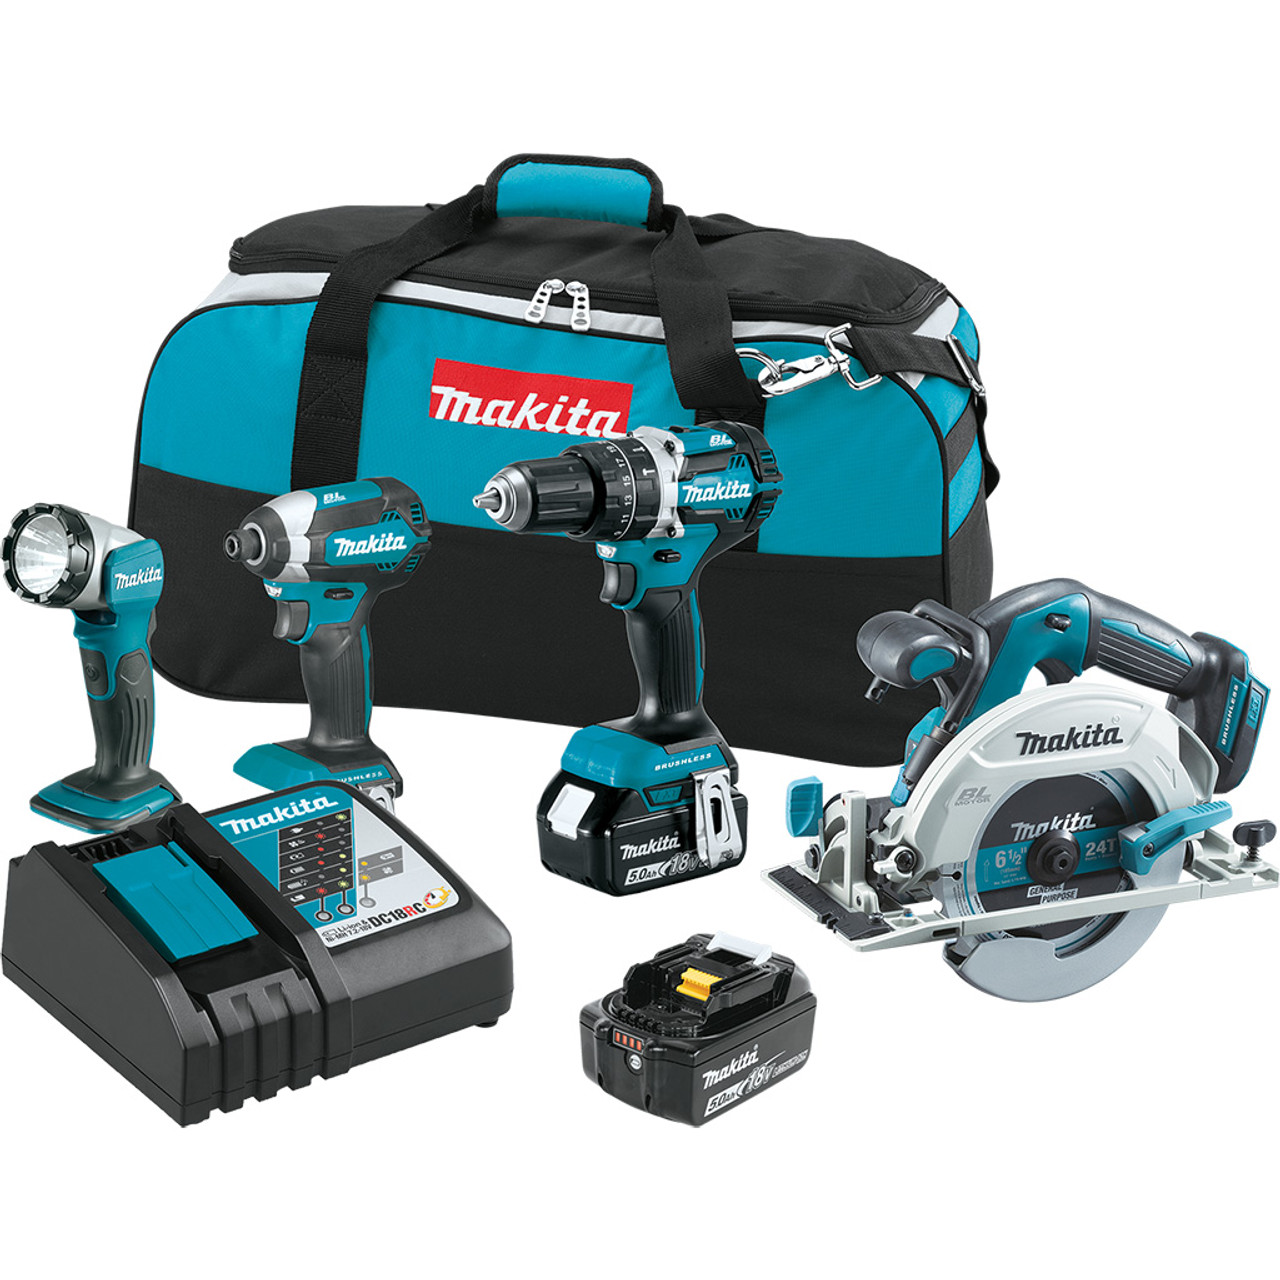 Makita 18V Lithium-Ion Brushless Cordless 4-Tool Kit (5.0Ah) - Midwest Technology Products